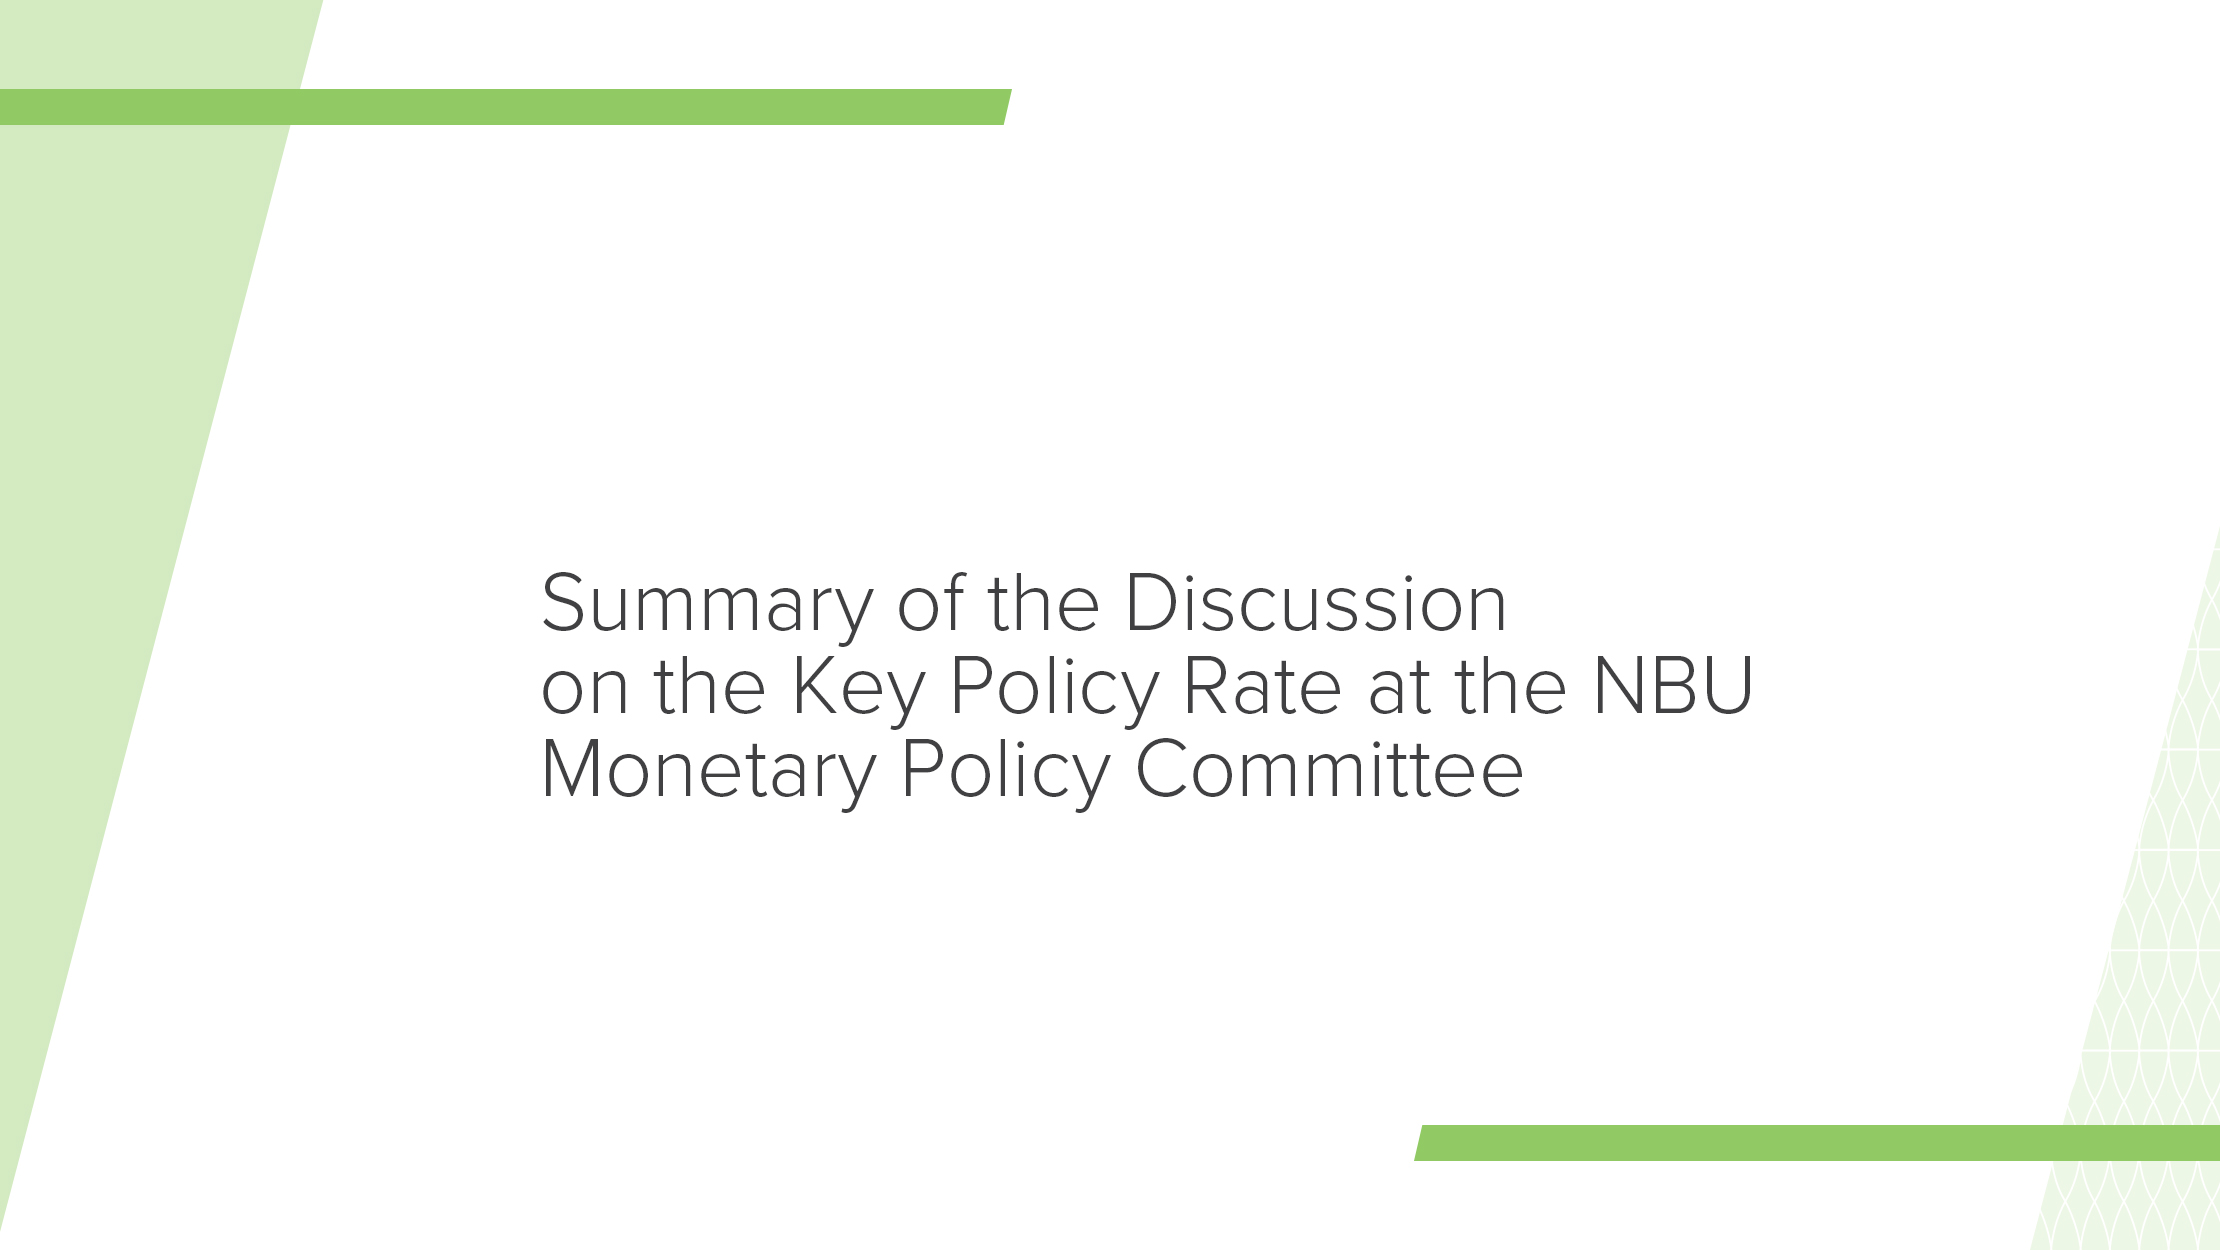 Summary of the Key Policy Rate Discussion by the NBU Monetary Policy Committee 10 June 2020